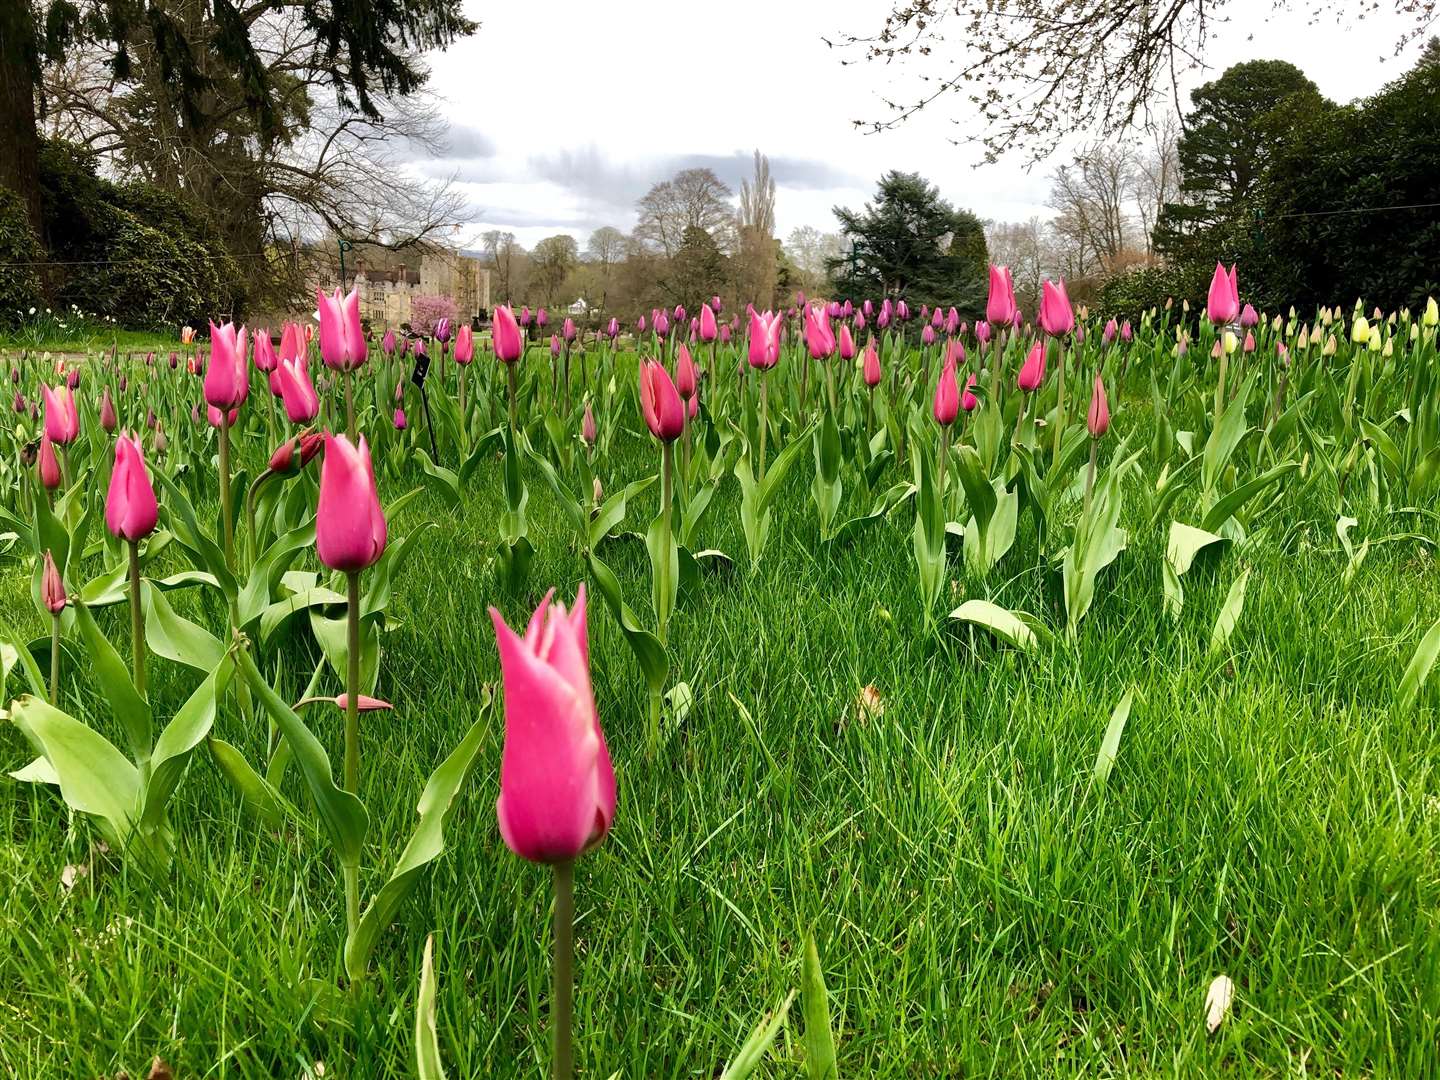 Visit Hever Castle to see the tulips